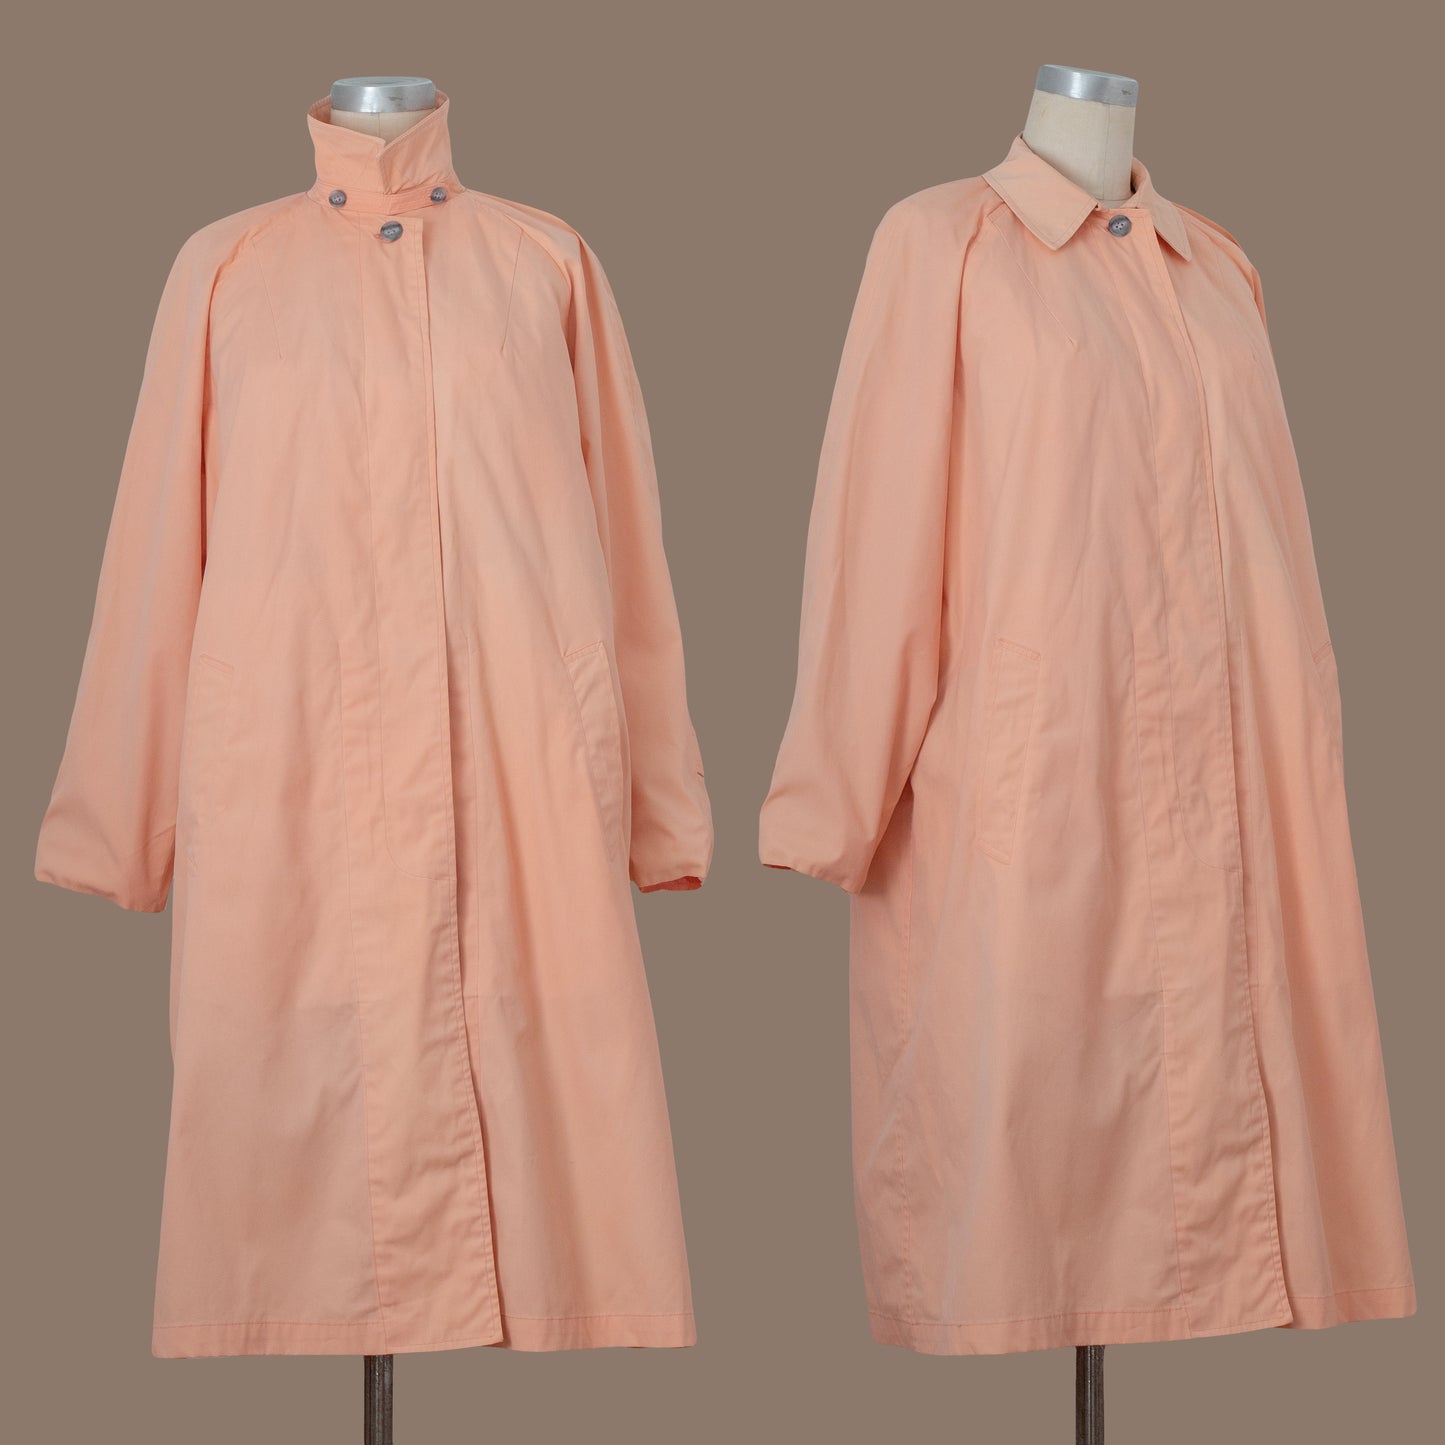 Vintage 1940s Pink Cotton Trench Coat